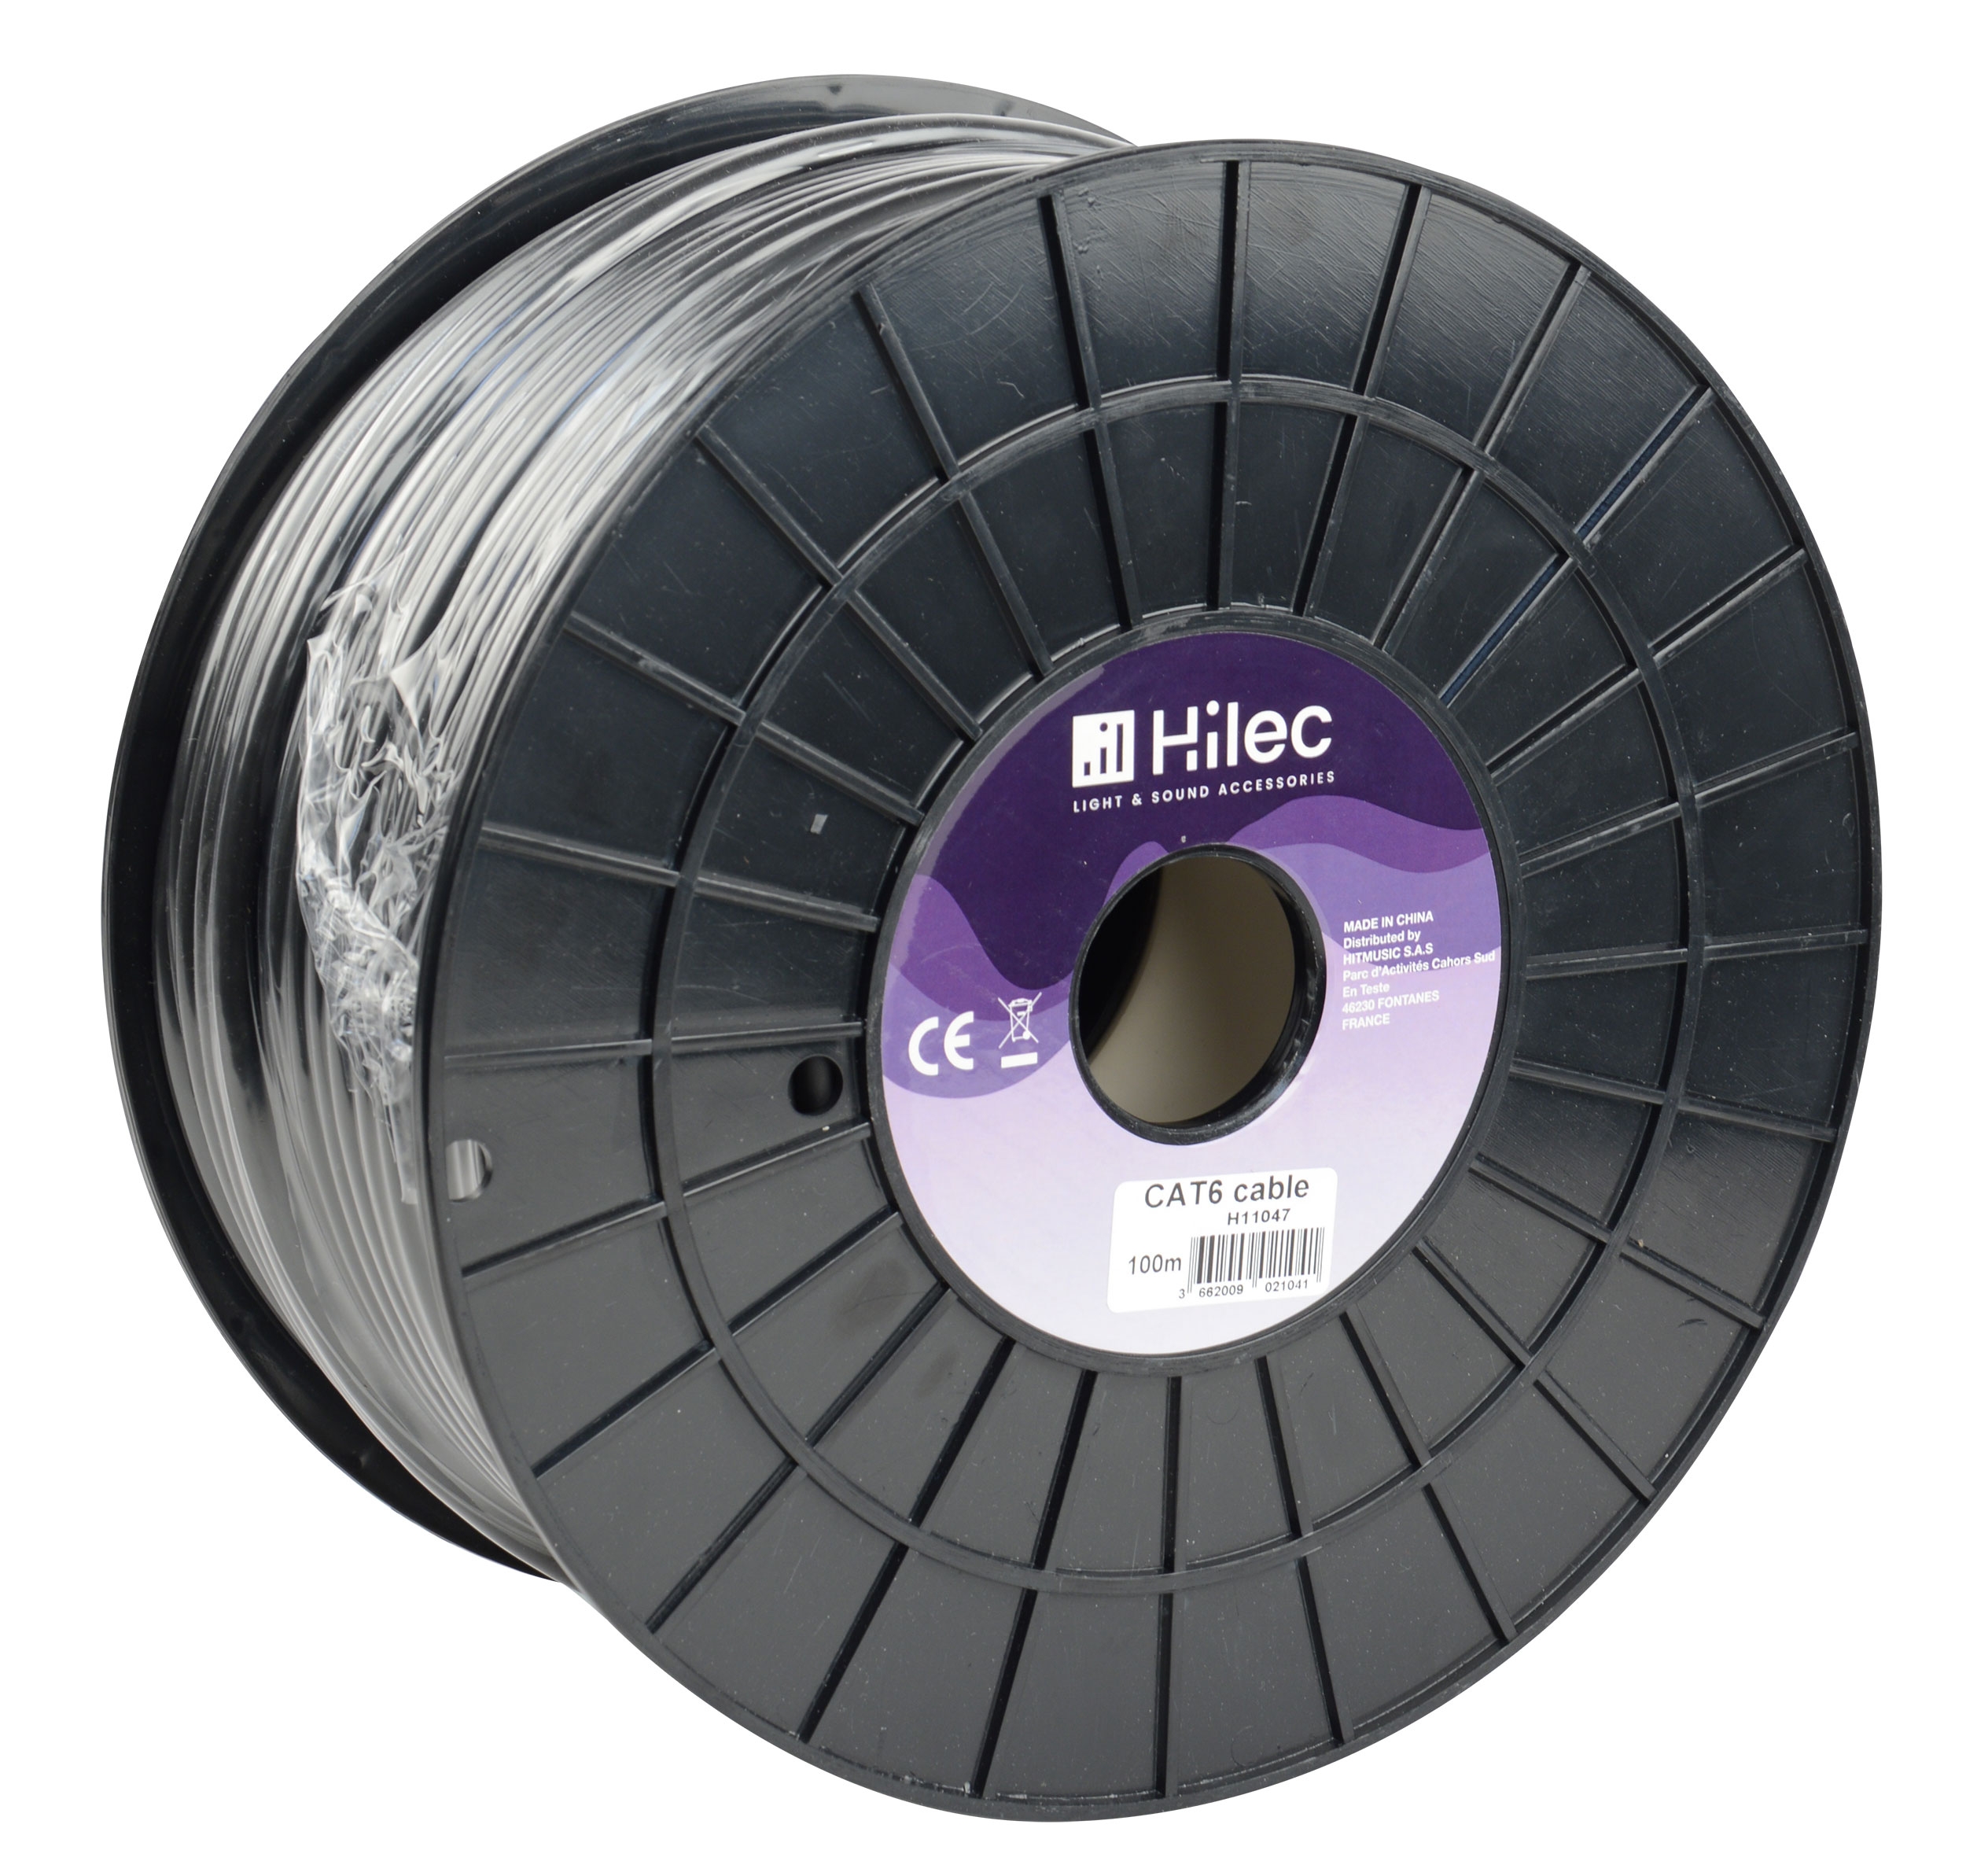 CAT6 exible cable 26AWG - 100m roll - Black